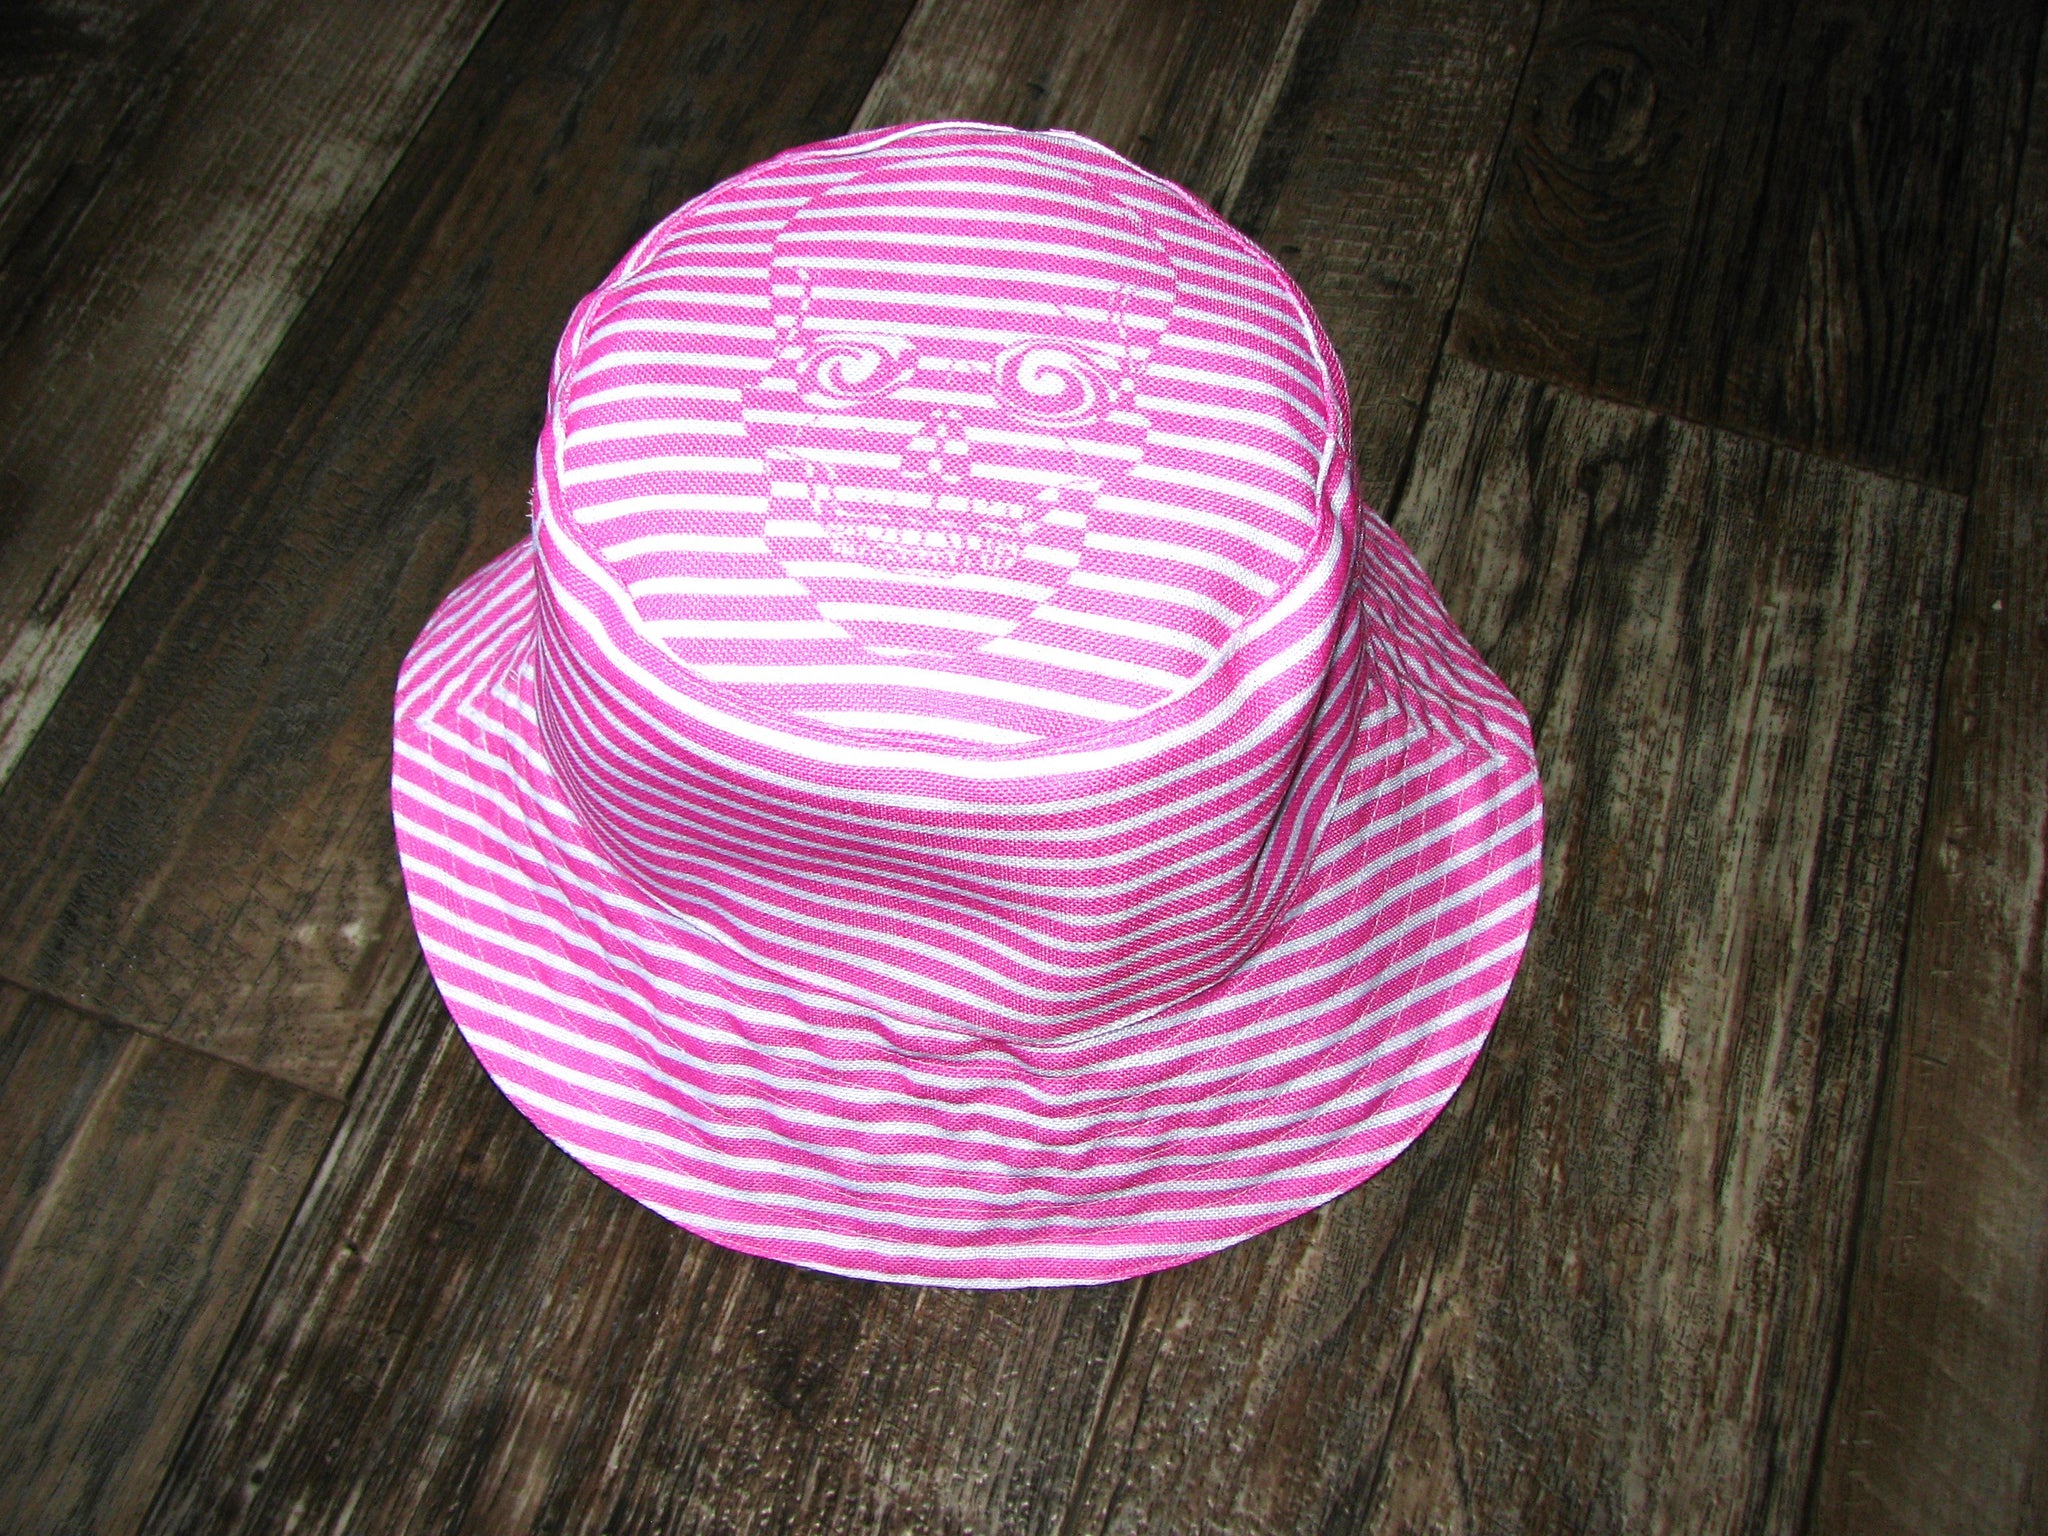 Skulls and Pink Blossoms with Pink Dizzy Skull Reversible Bucket Hat